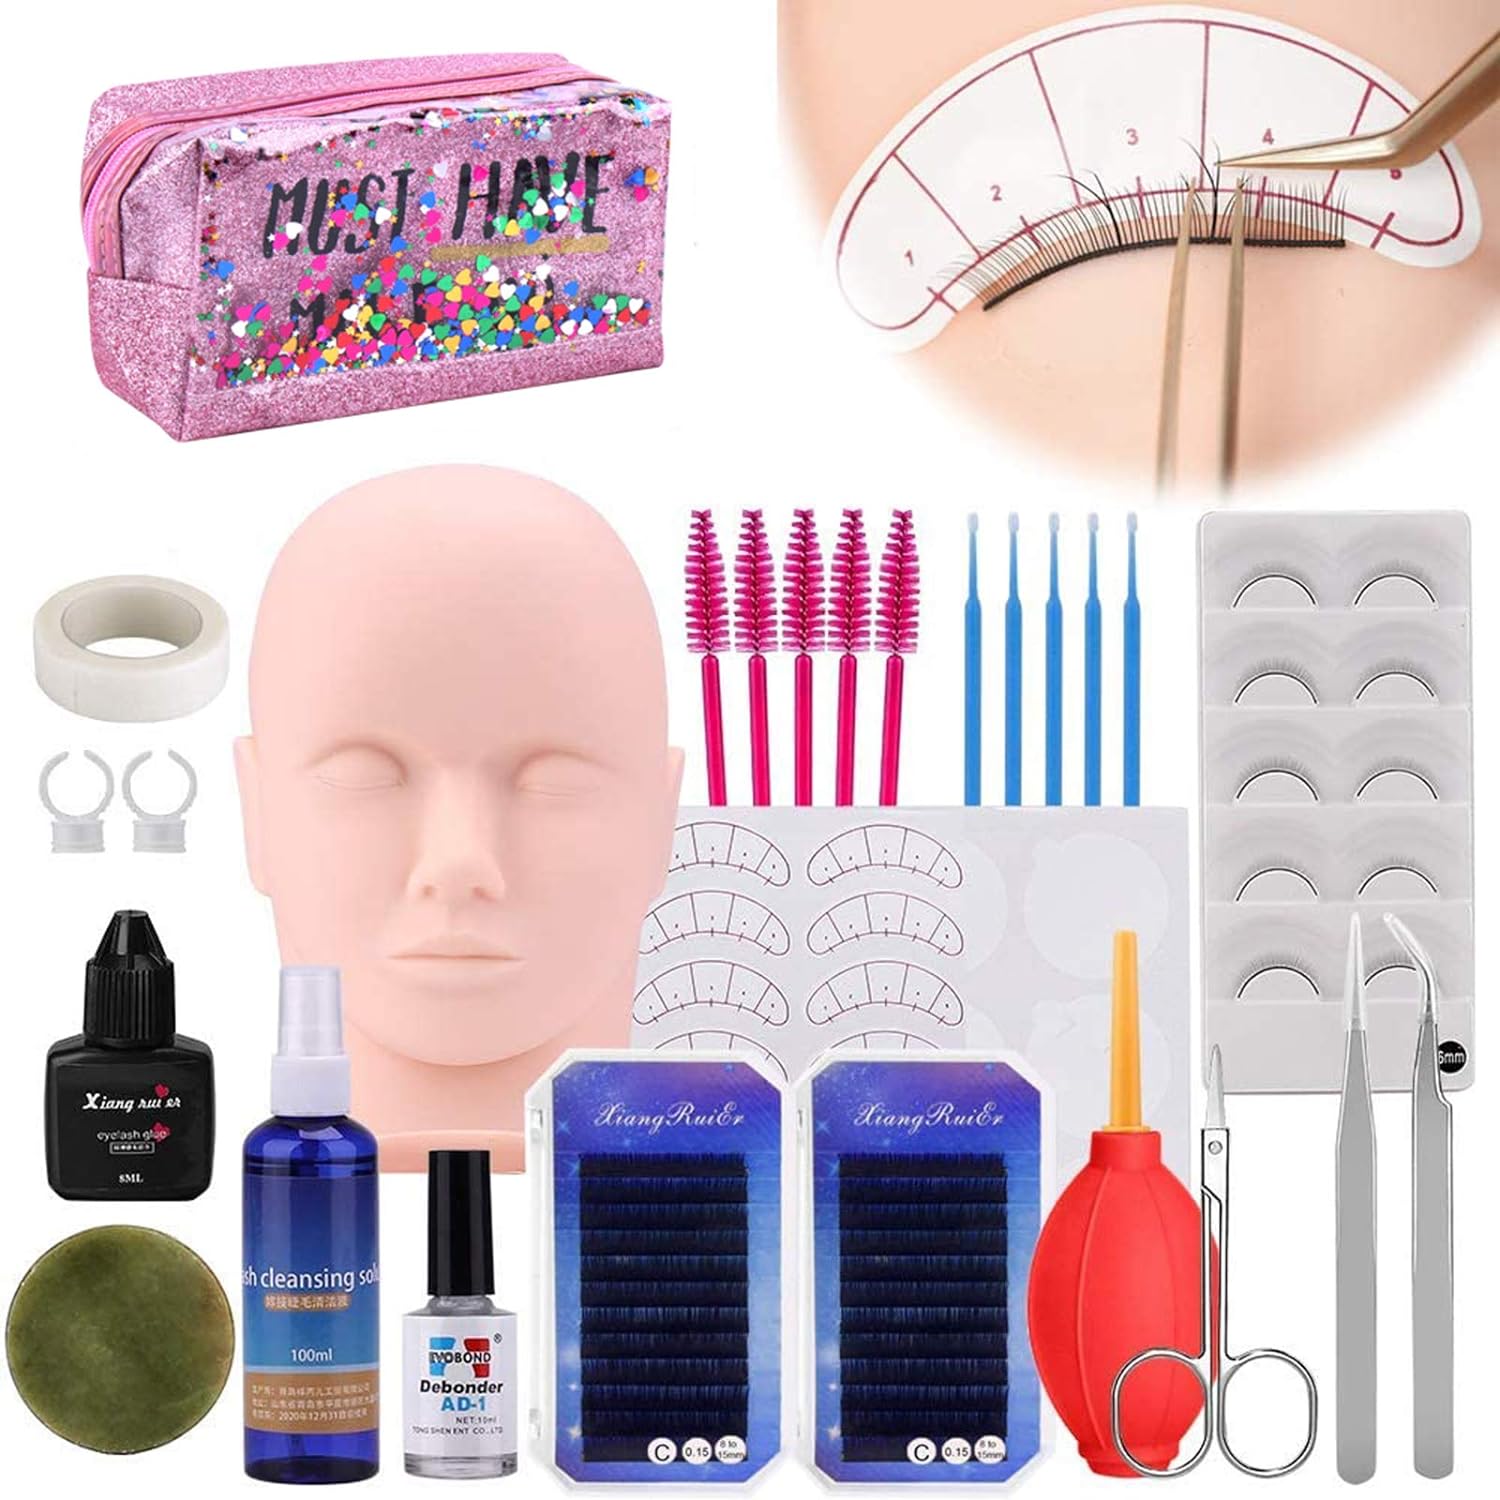 Eyelash Extension Training Mannequin Head Set, [Upgraded] MYSWEETY Makeup Practice Kit with Manikin Cosmetology Artist Doll Head, False Eye Lashes Grafting with Glue